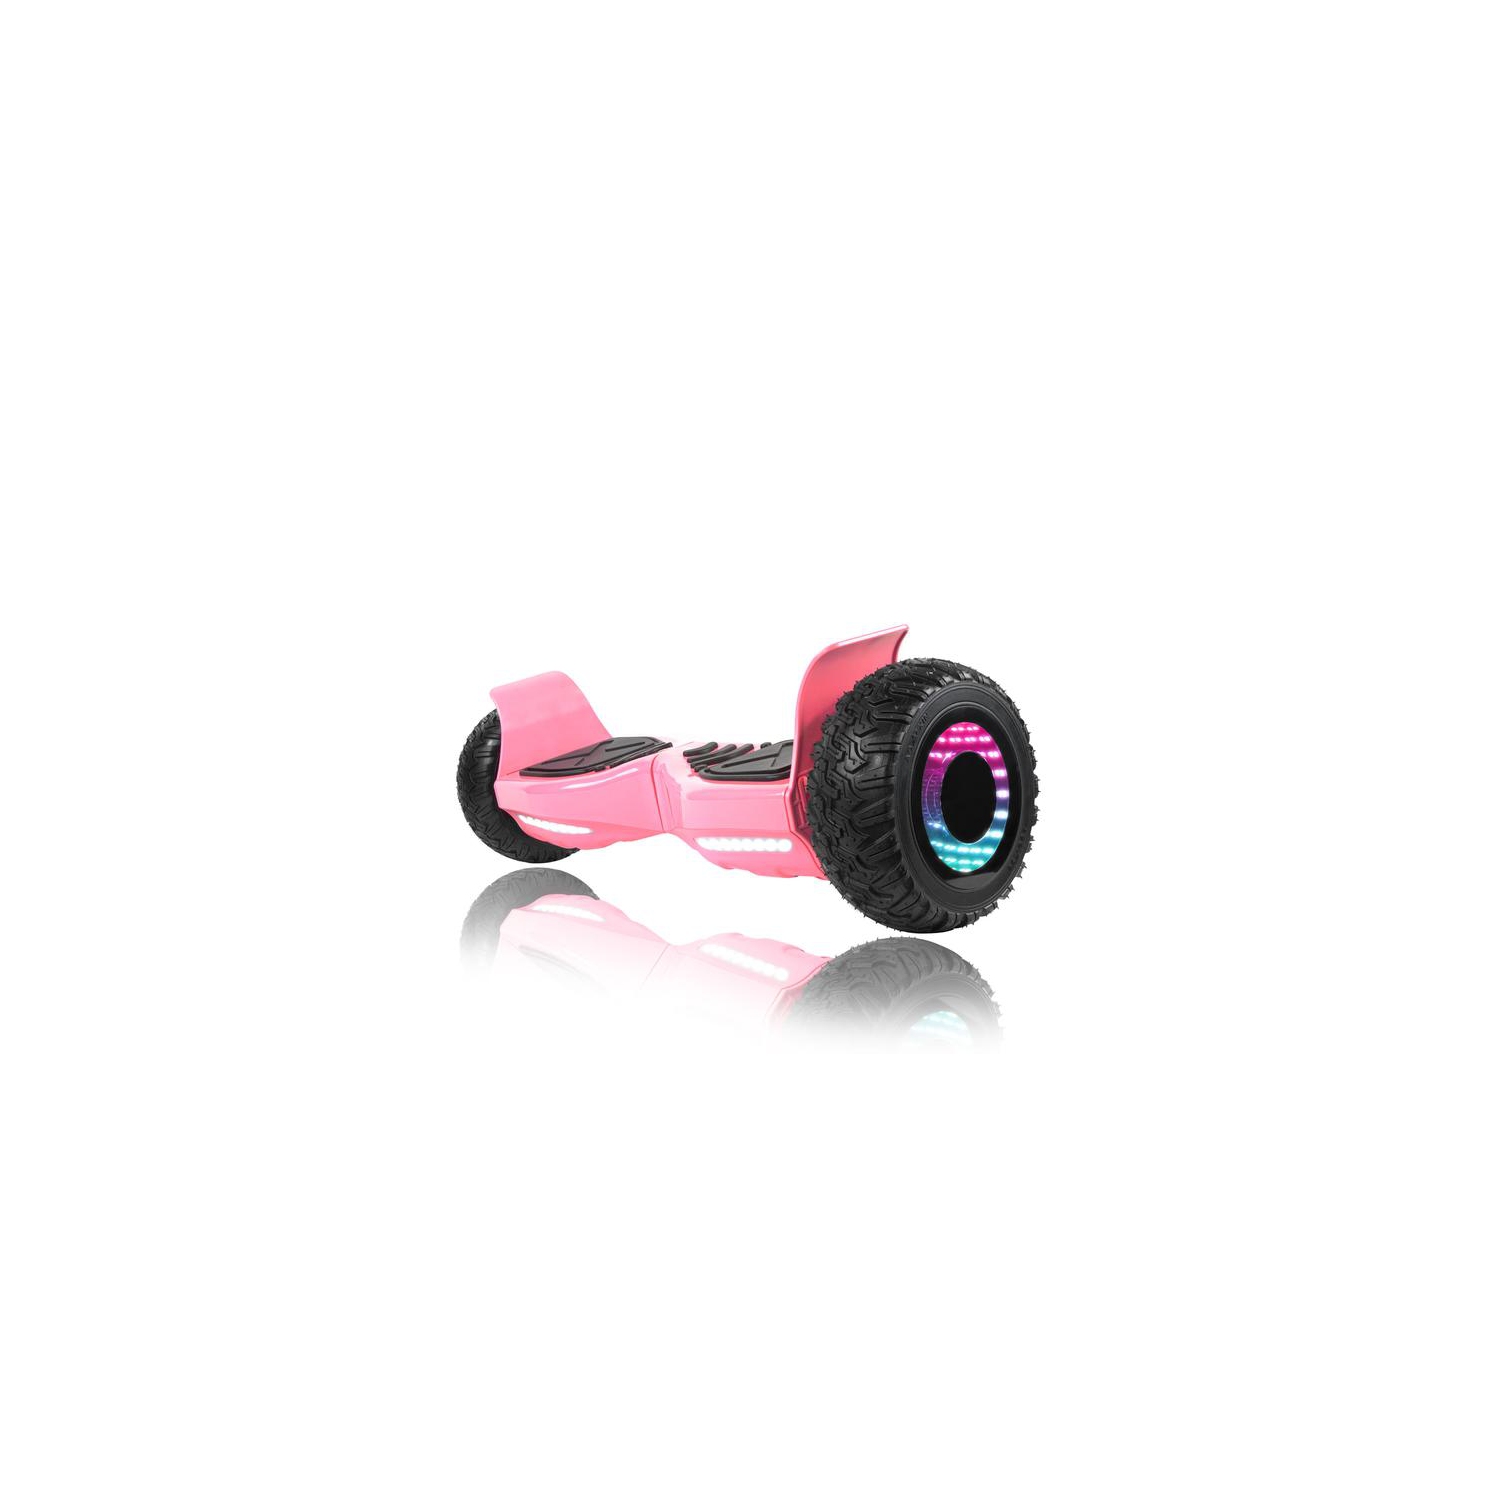 XPRIT 8.5 Tunnel Pink Heavy Duty All-Terrain HoverBoard Auto-Balance, Max Support 90 kg, Up to 9KM Range, Bluetooth UL2272-Certified